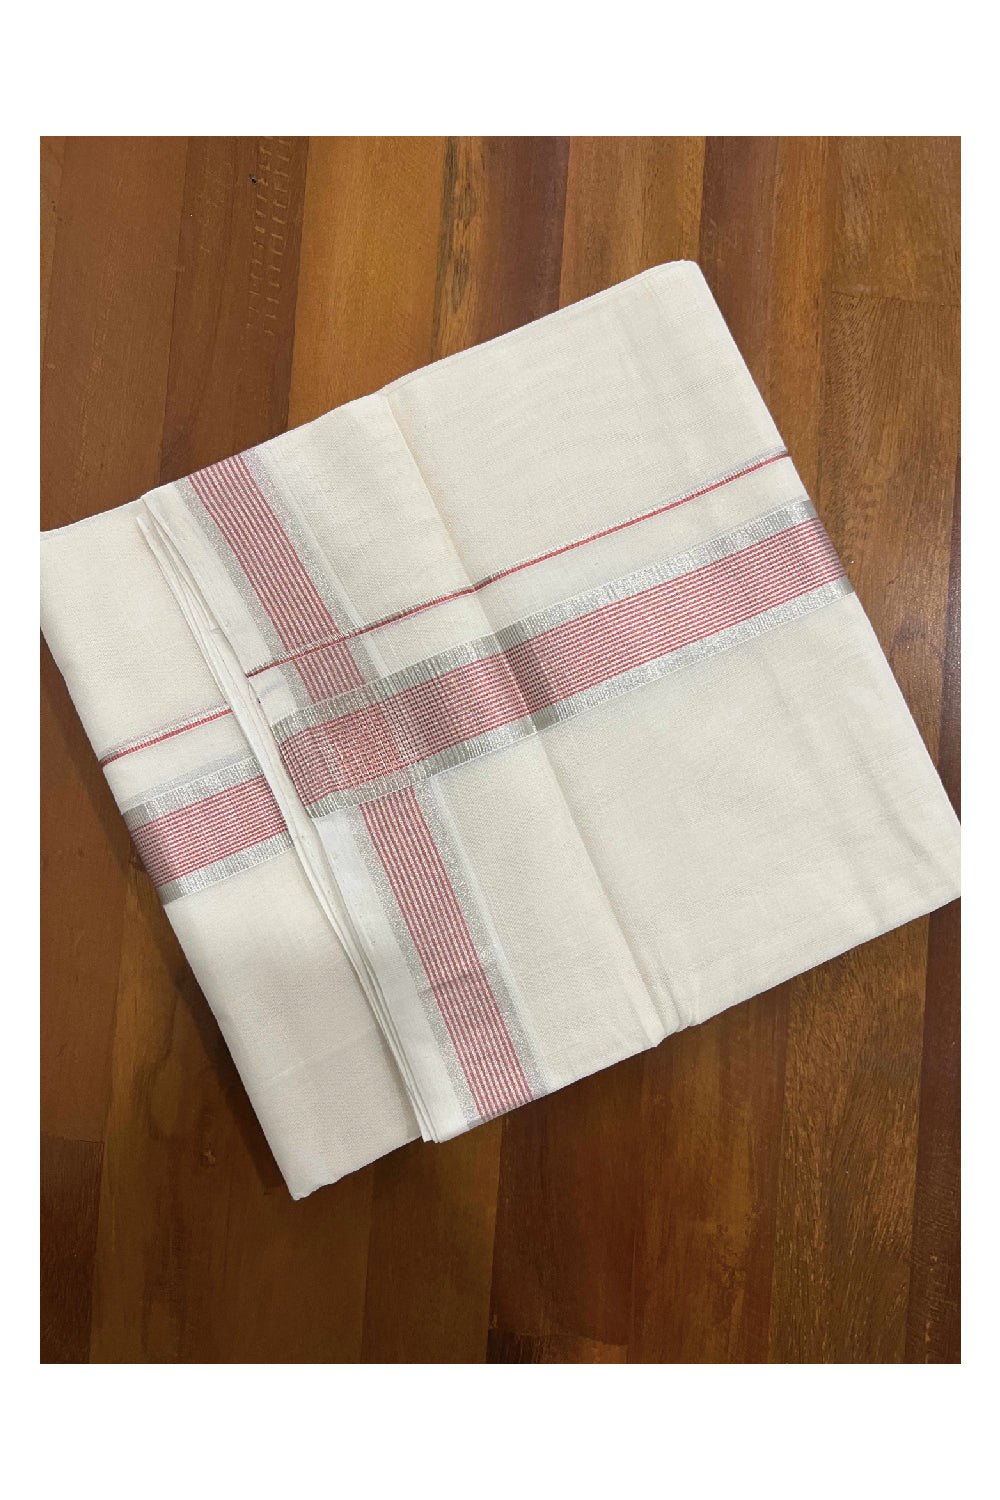 Southloom Kuthampully Pure Cotton Handloom Mundu with Silver and Red Kasavu Lines Border